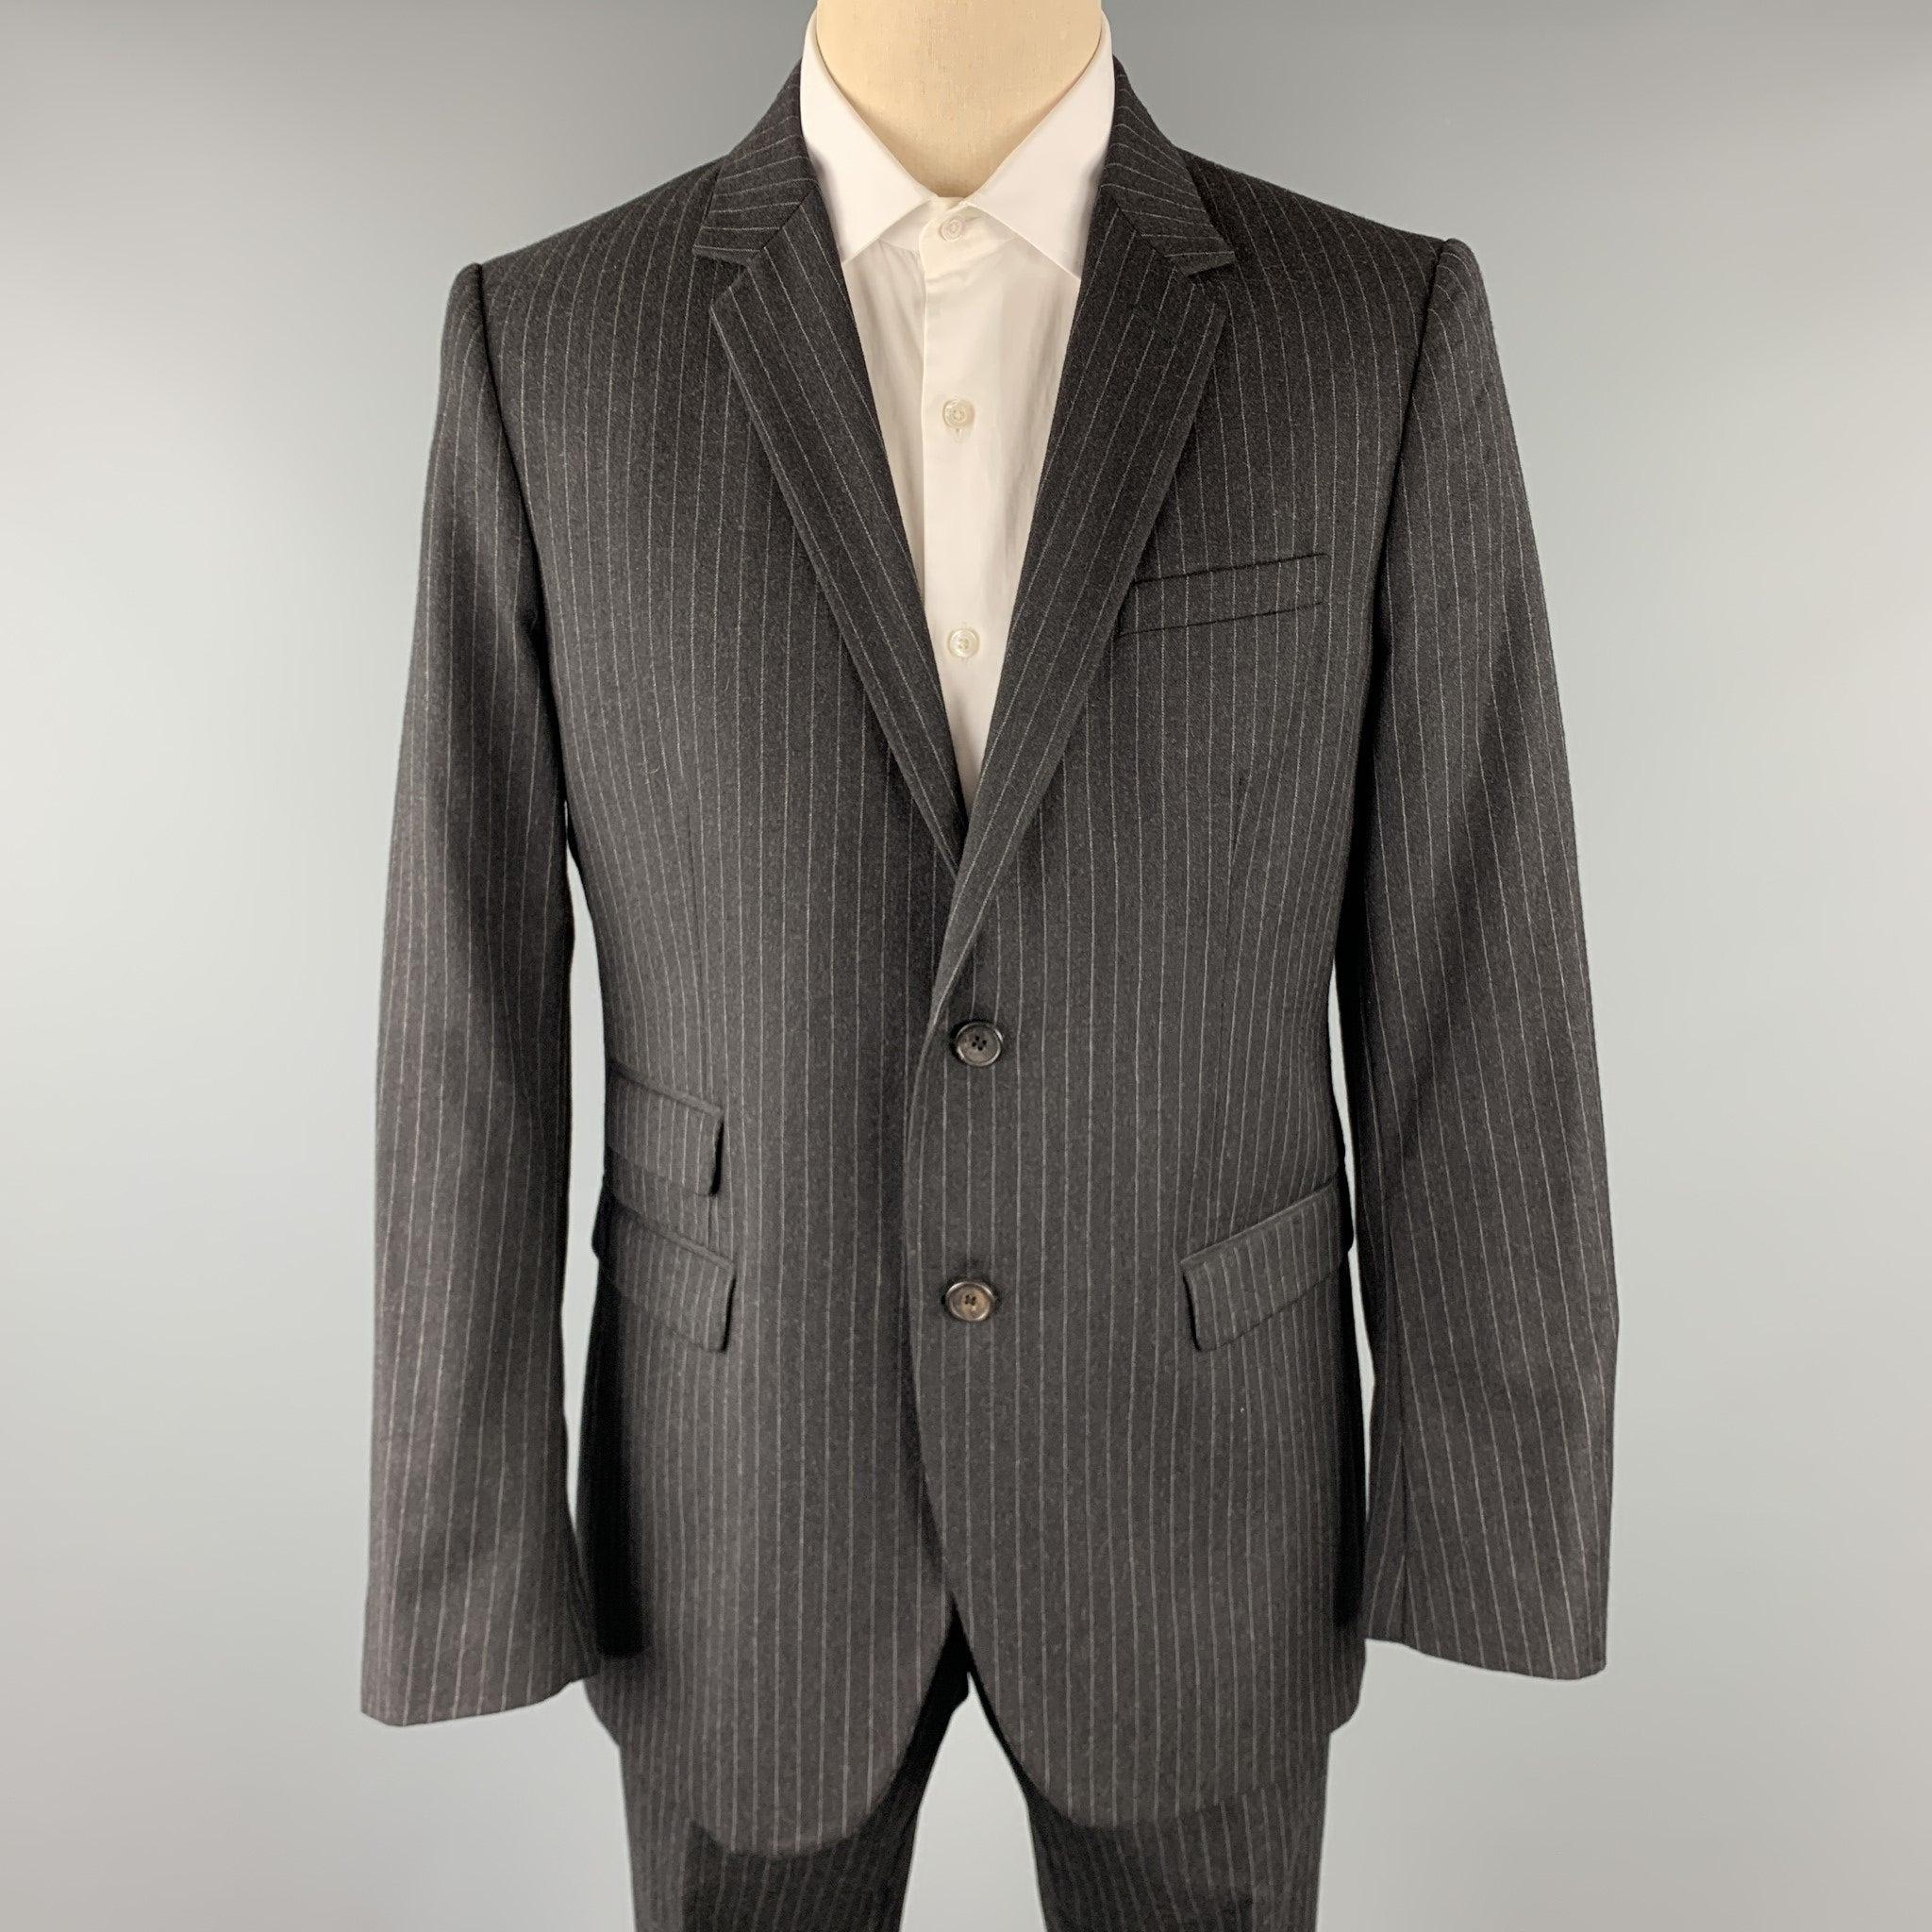 NEIL BARRETT Size 42 Regular Charcoal Stripe Wool Notch Lapel Suit In Excellent Condition For Sale In San Francisco, CA